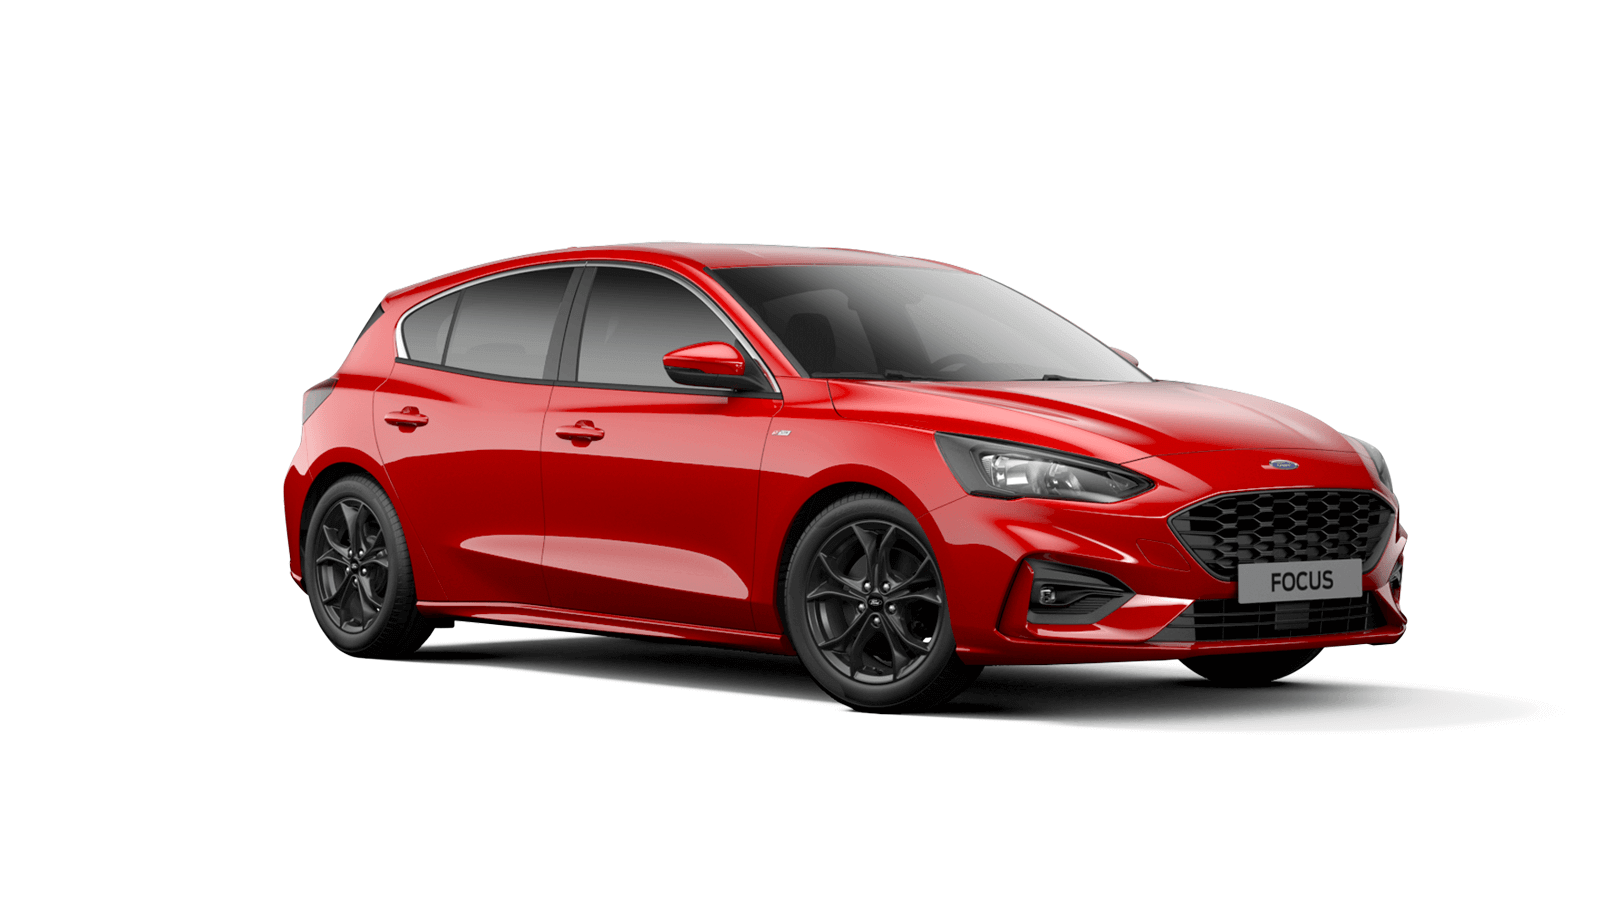 Ford Focus ST-Line Business